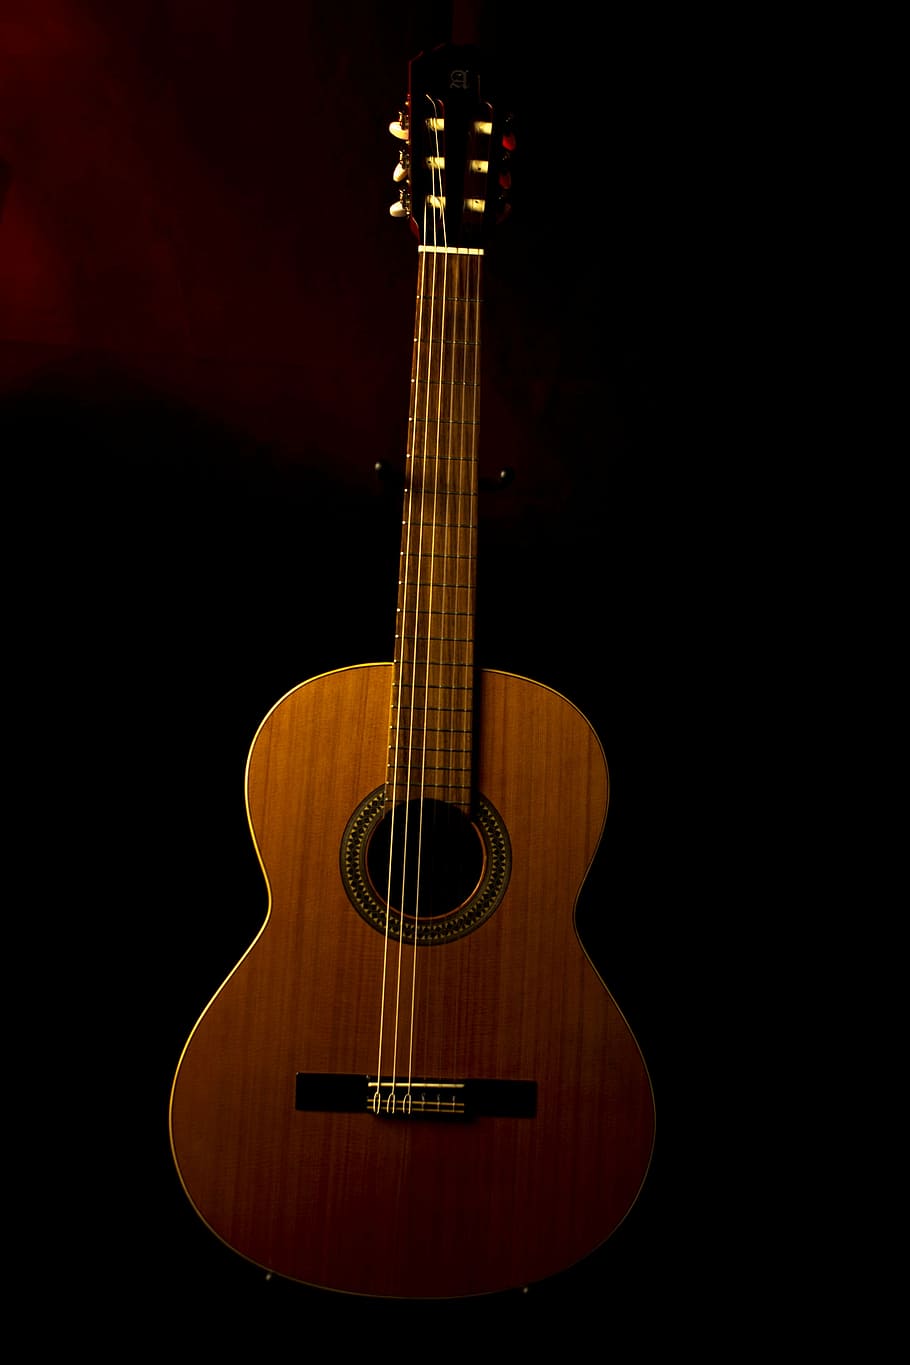 brown, acoustic, guitar, black, surface, music, spanish guitar, instrument, playing the guitar, string instrument